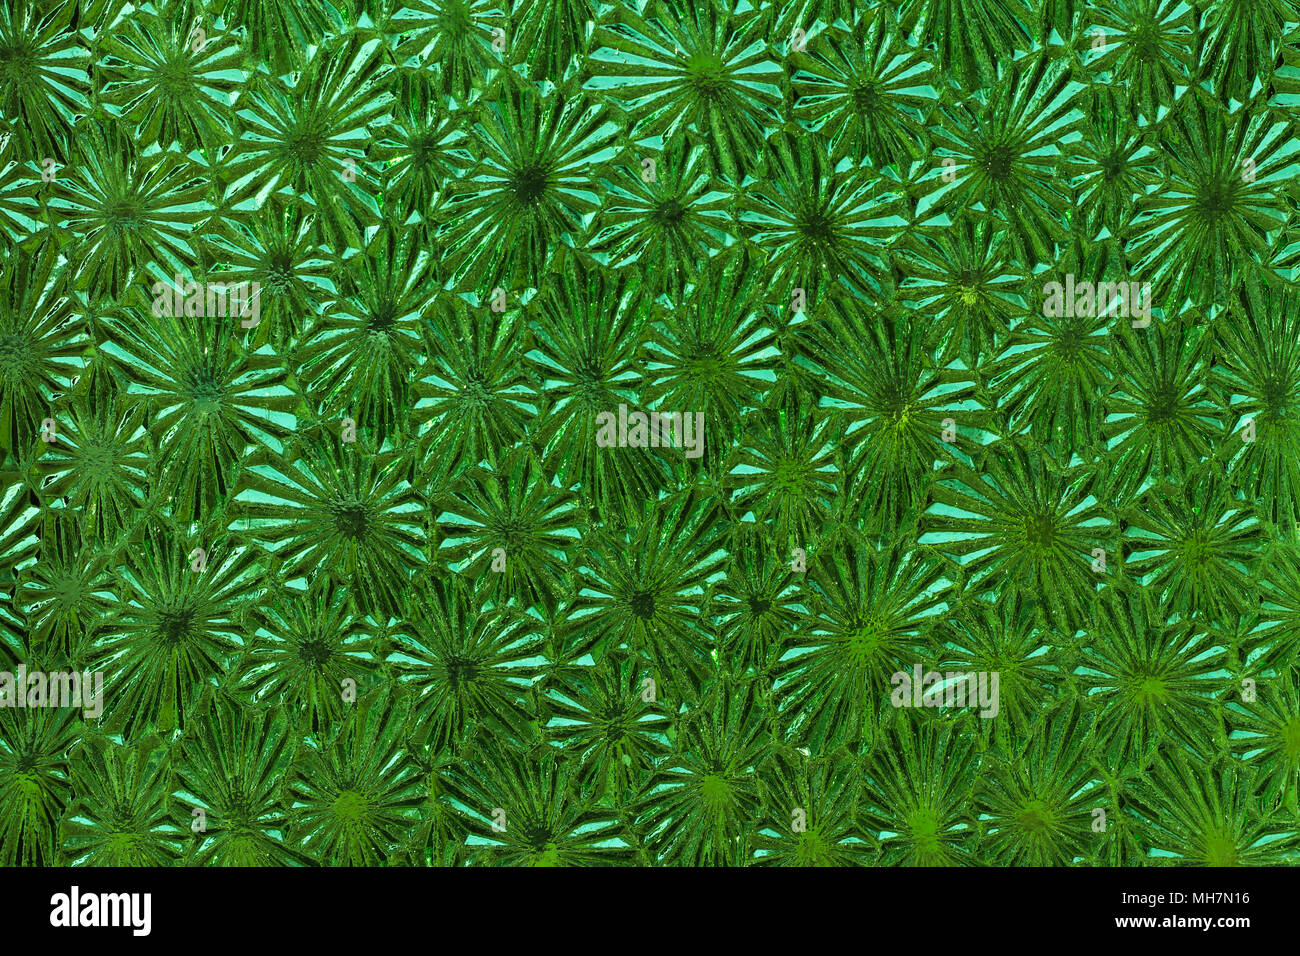 Ornate green glass - detail of the surface - glass texture - patterned glass Stock Photo